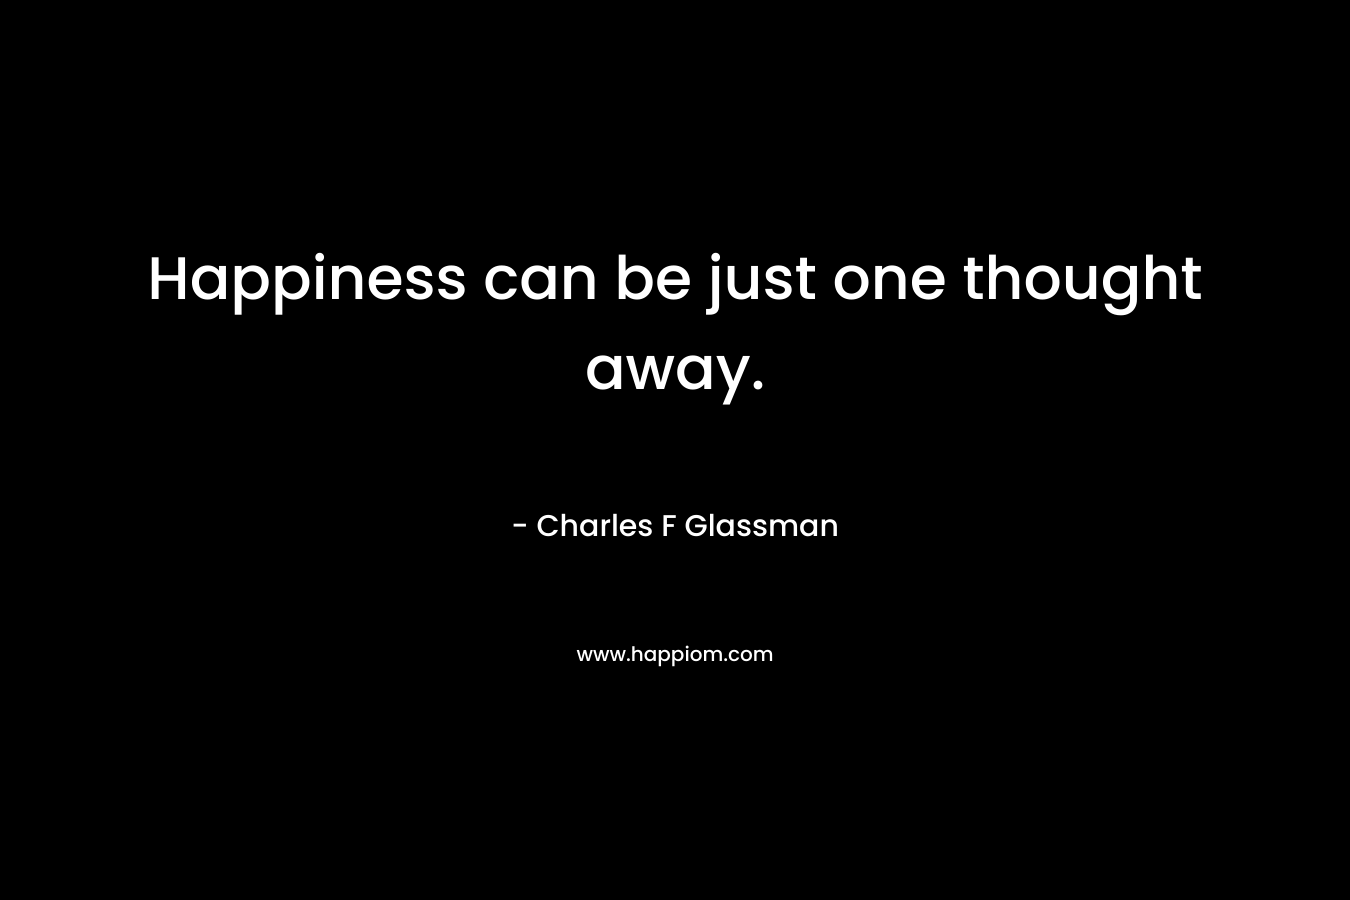 Happiness can be just one thought away.